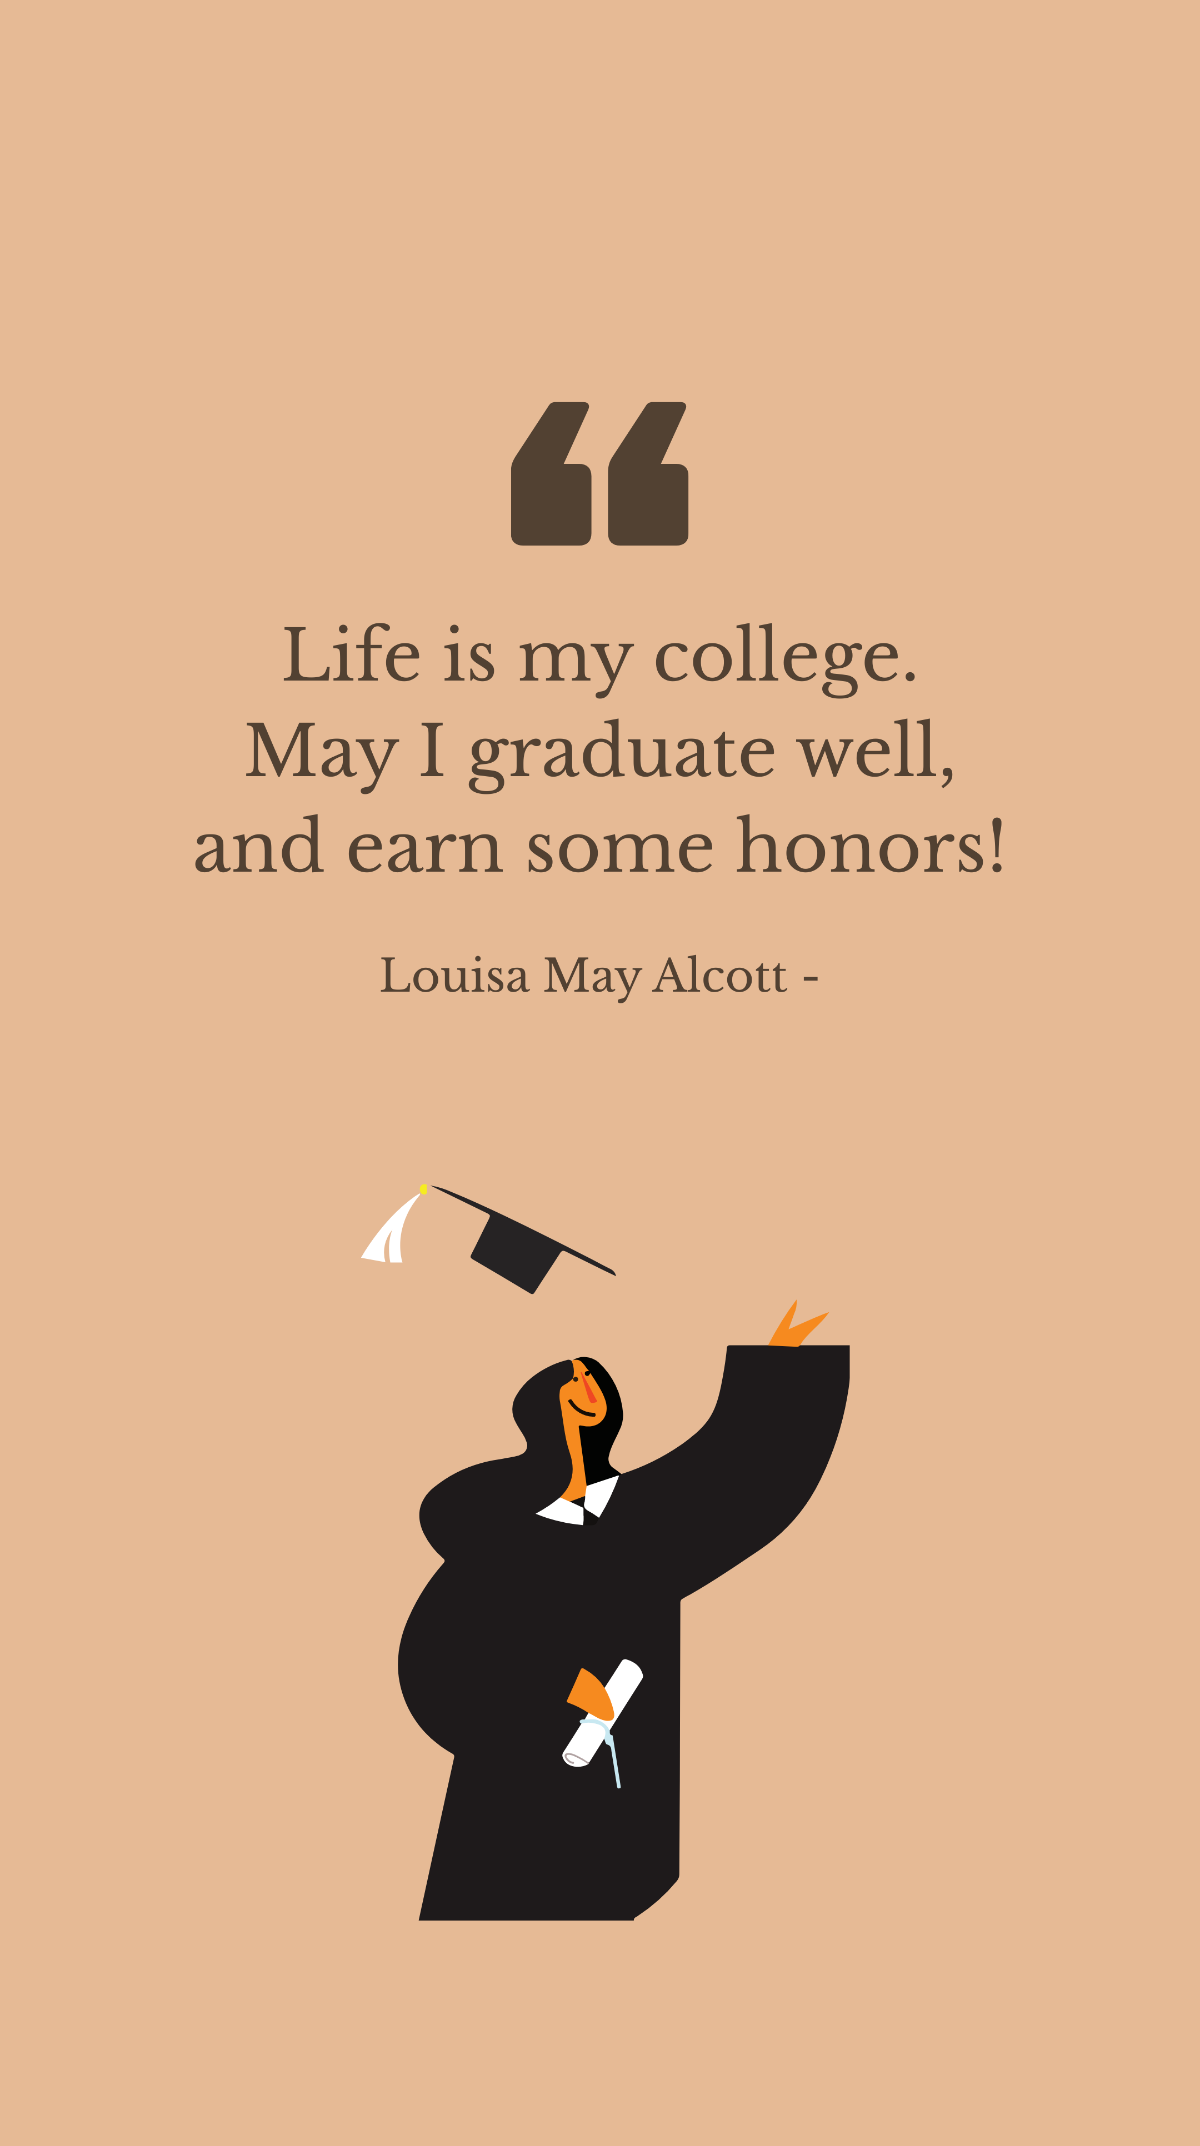 Louisa May Alcott - Life is my college. May I graduate well, and earn some honors! Template